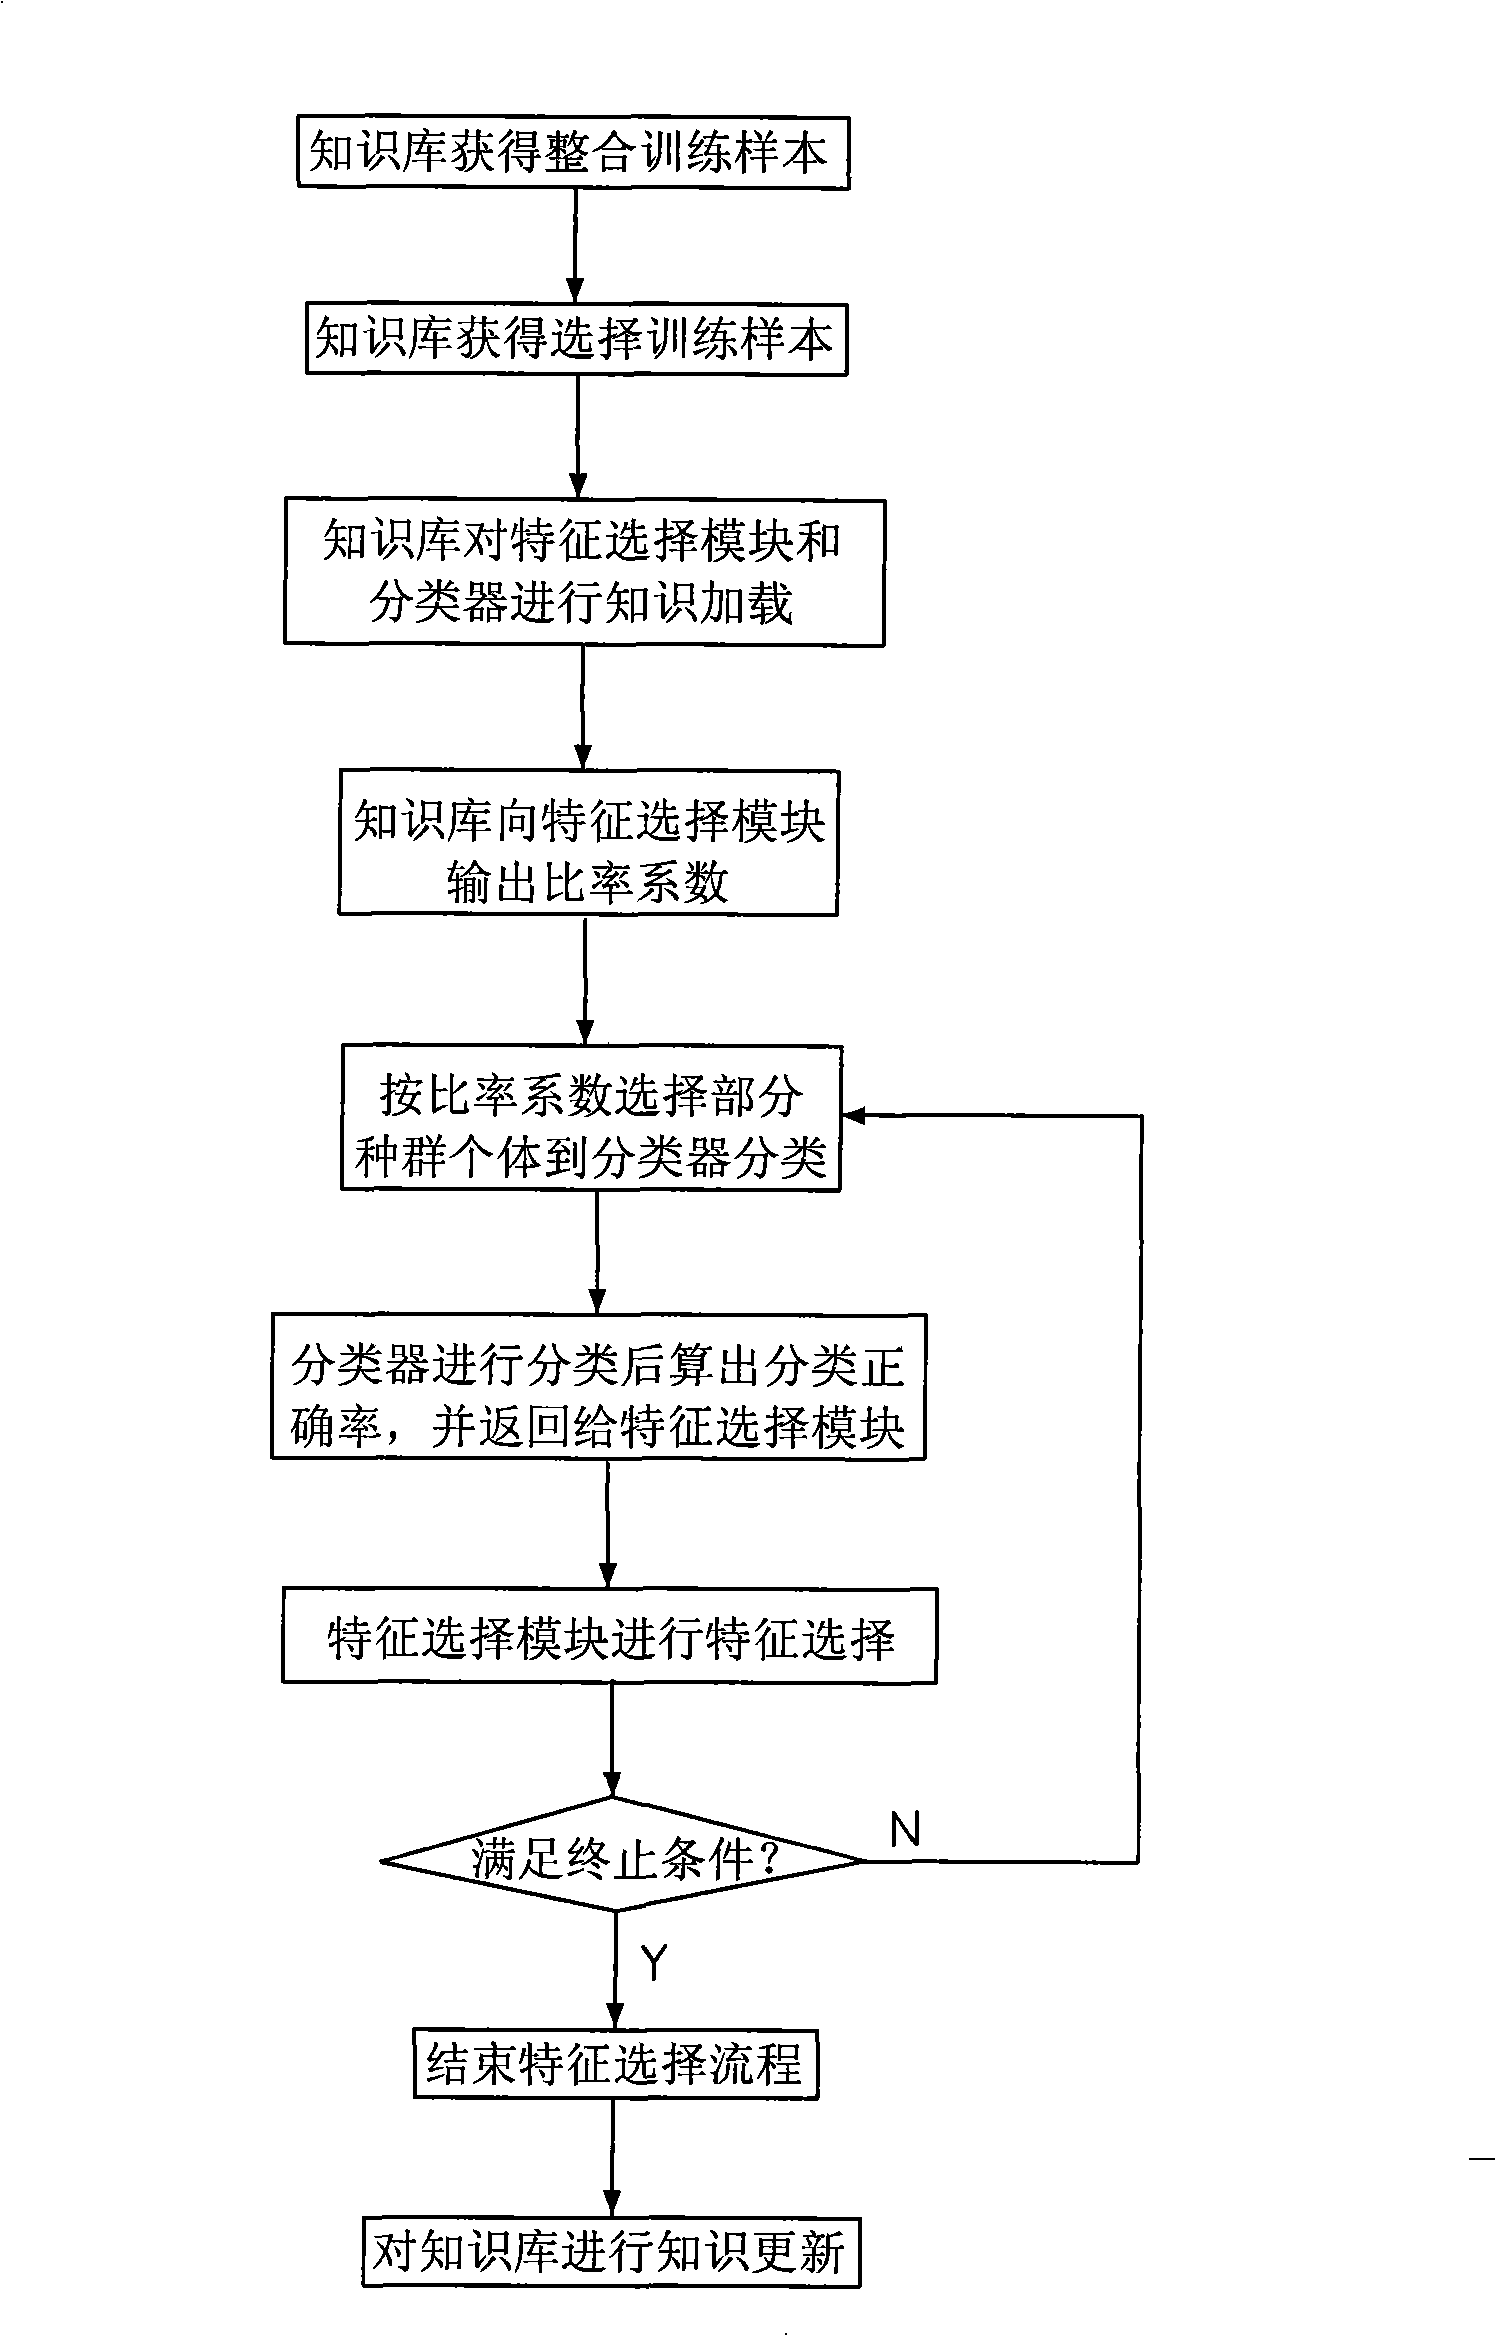 Dynamic feature selection method for mode classification